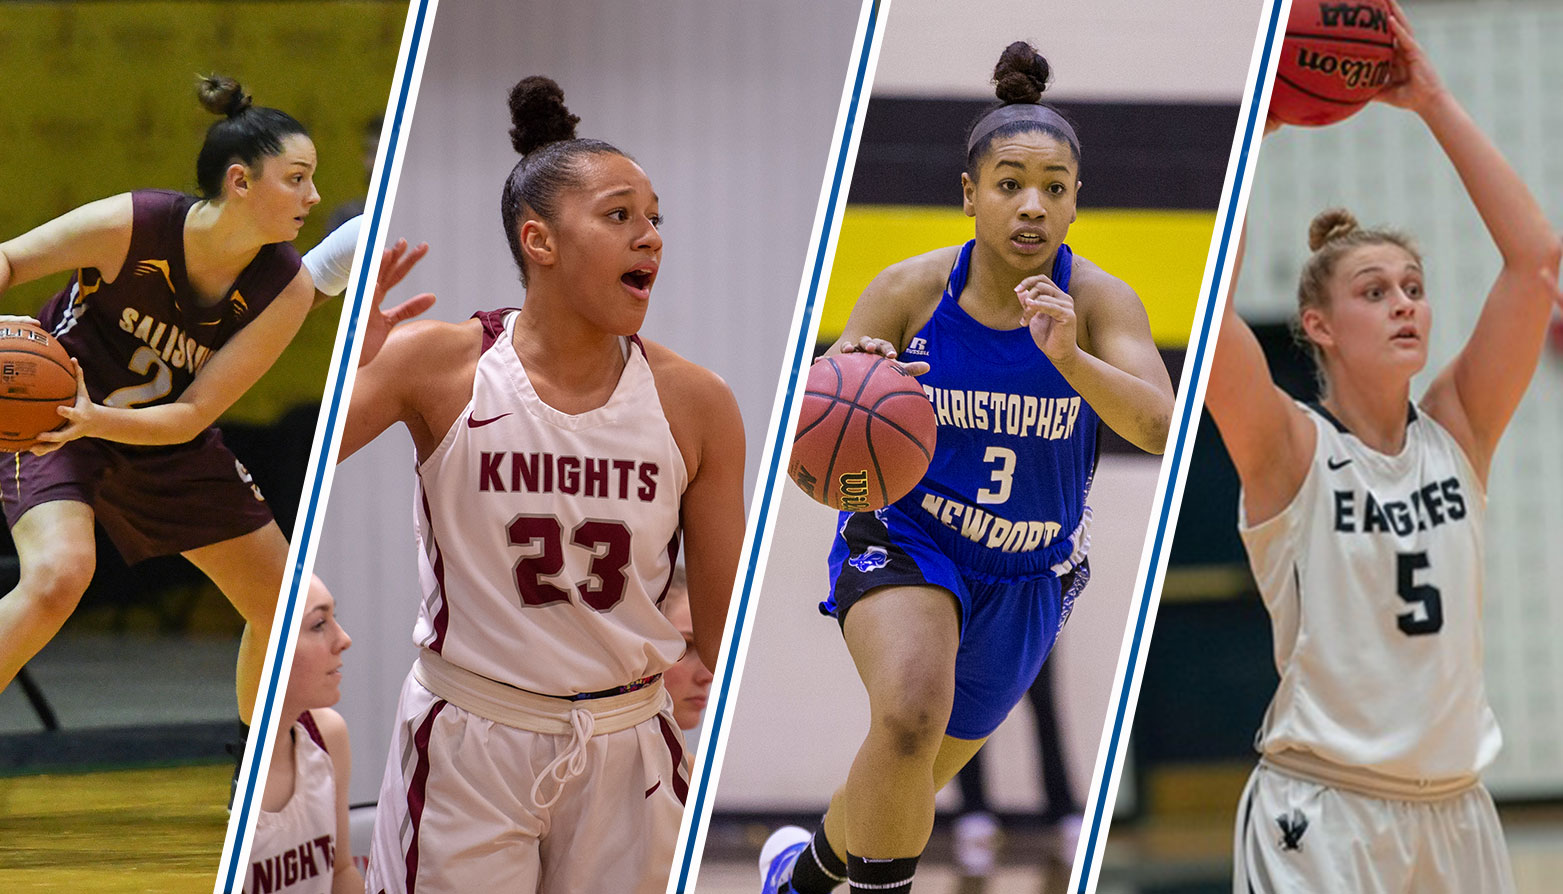 Top Seeds Advance to Thursday's CAC Women's Basketball Tournament Semifinals